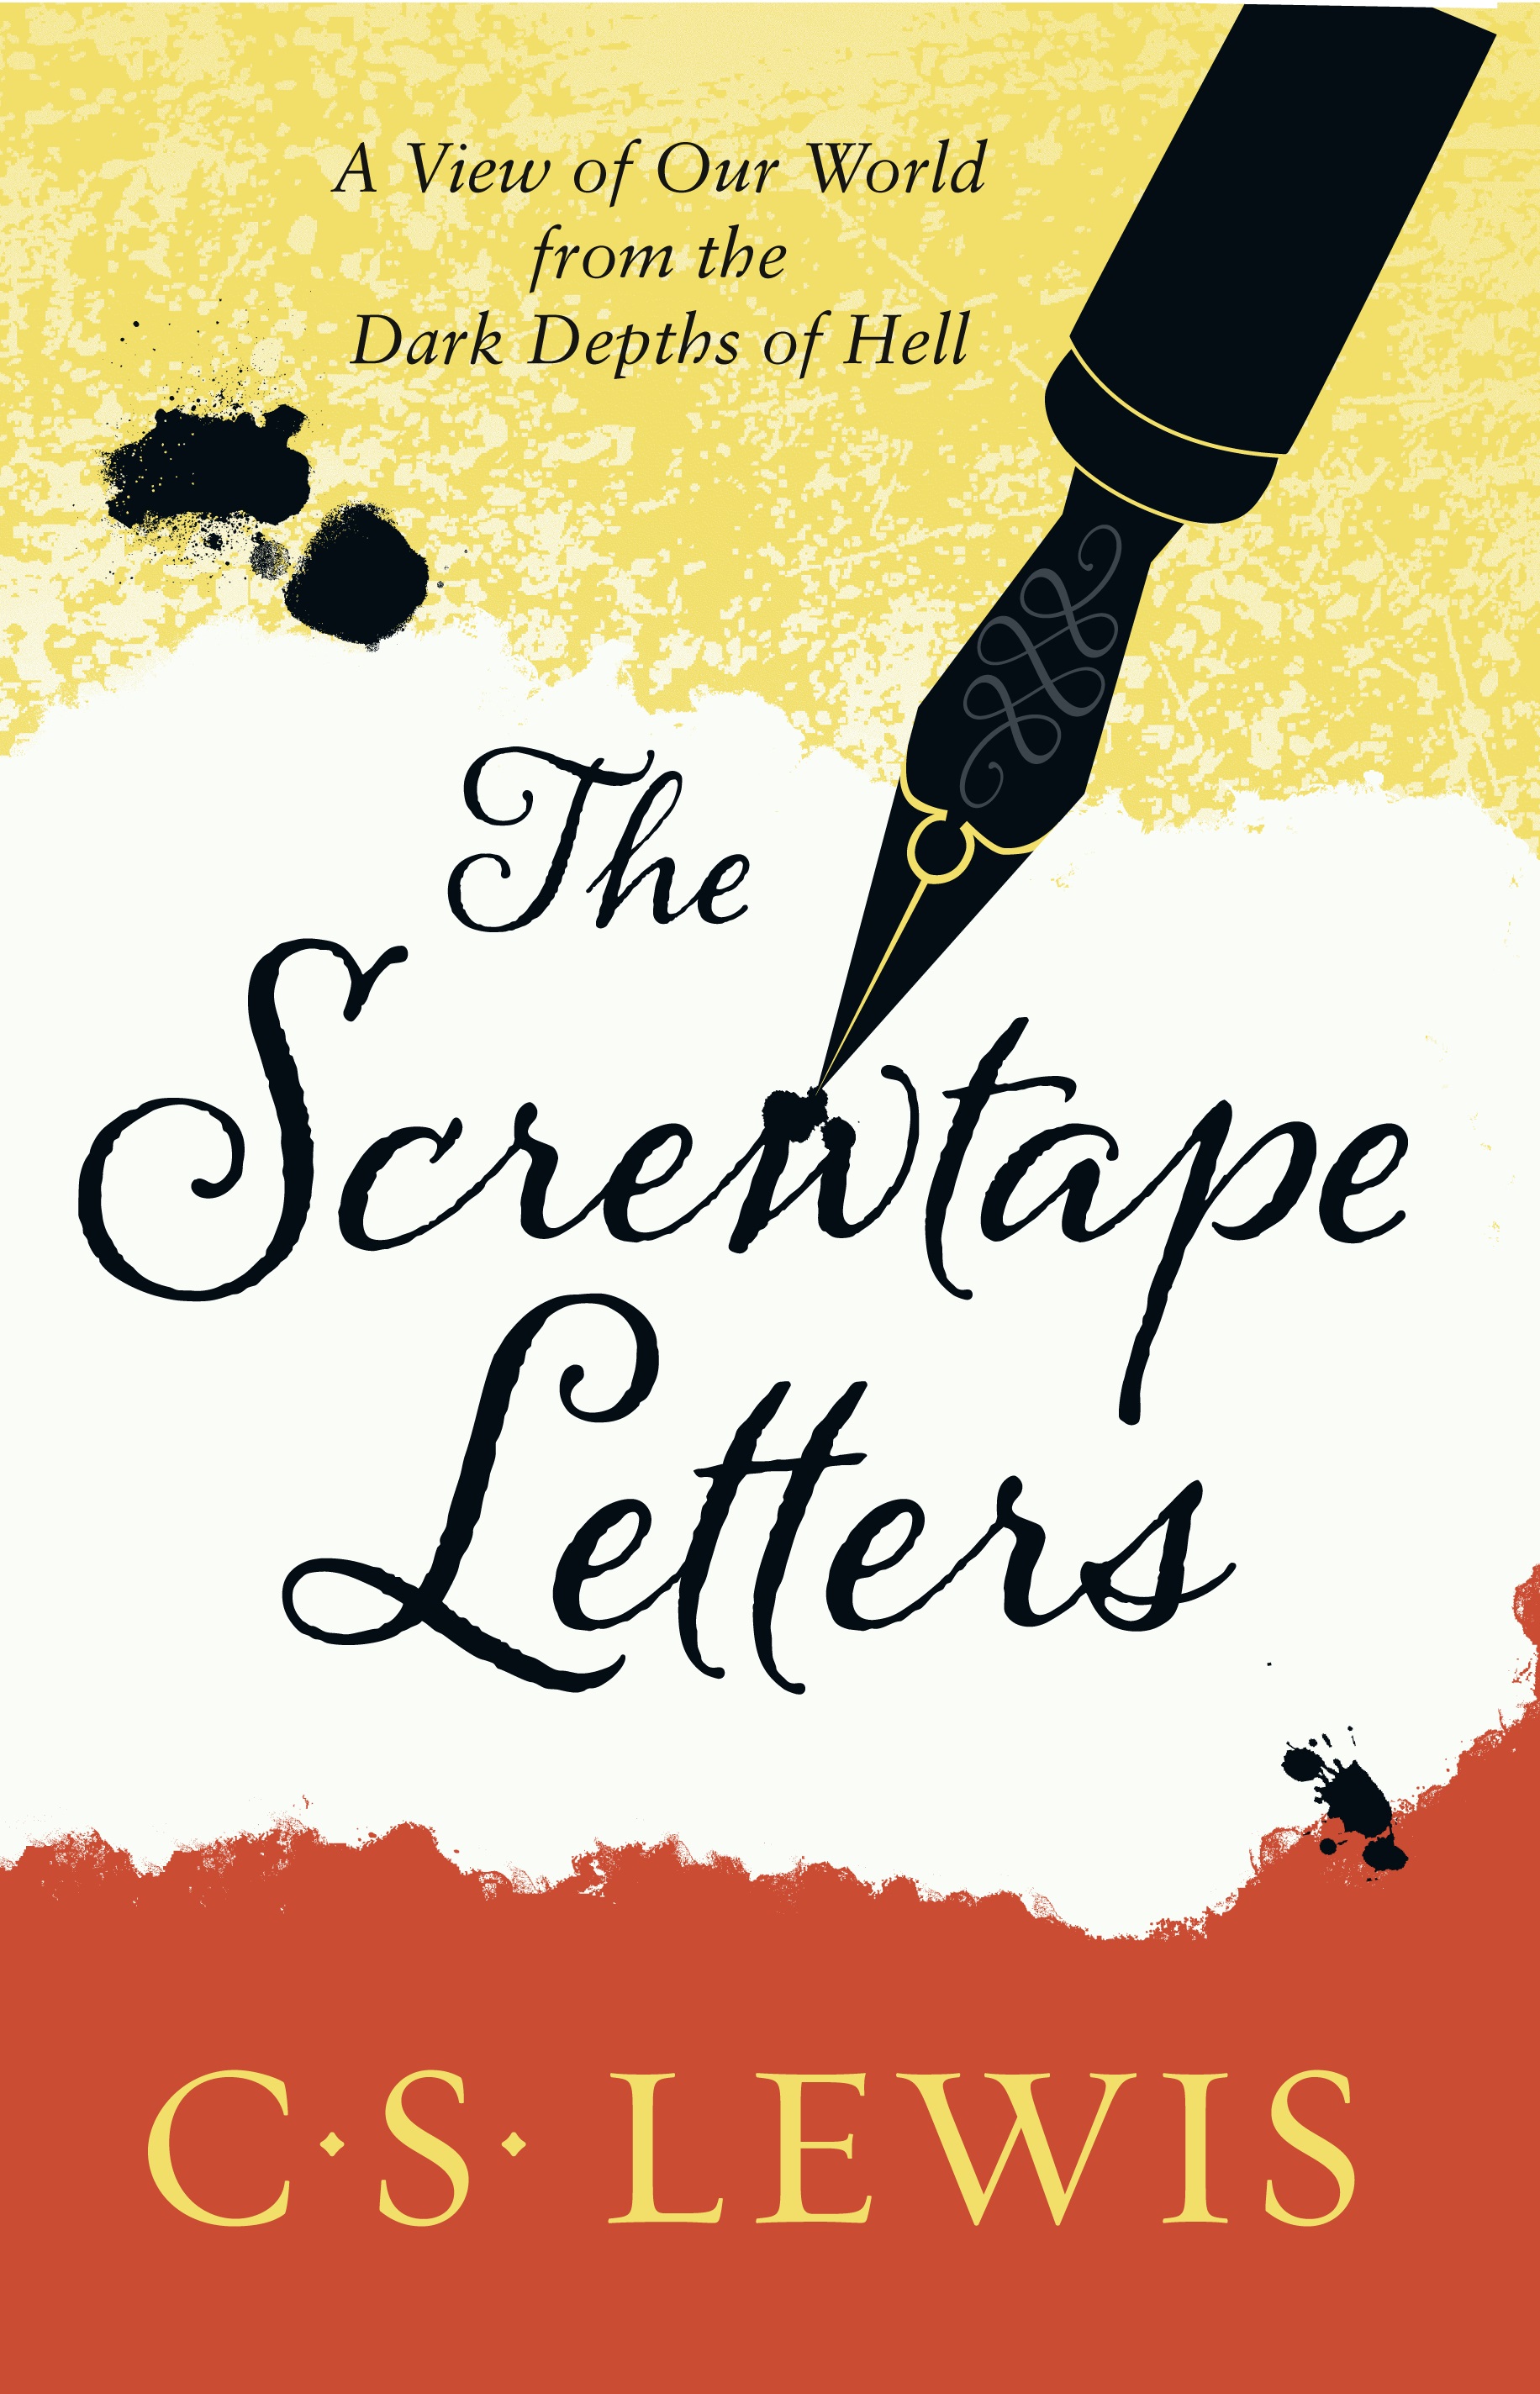 The Screwtape Letters by CS Lewis Fast Delivery at Eden